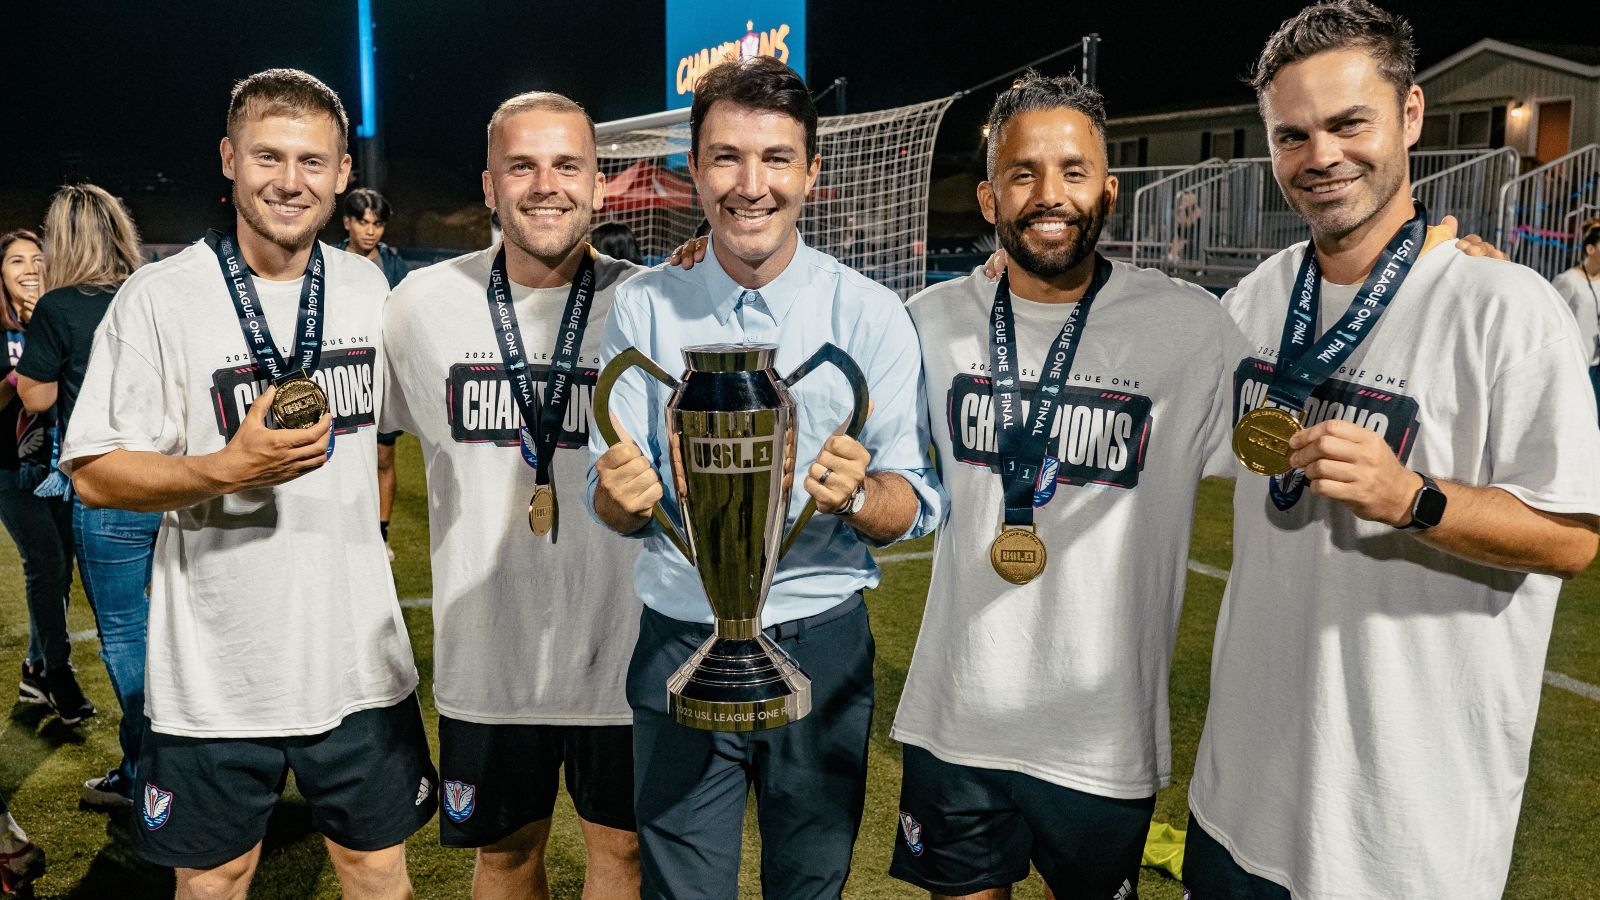 Ian Cameron Signs Multi-Year Contract Extension with Tormenta FC featured image